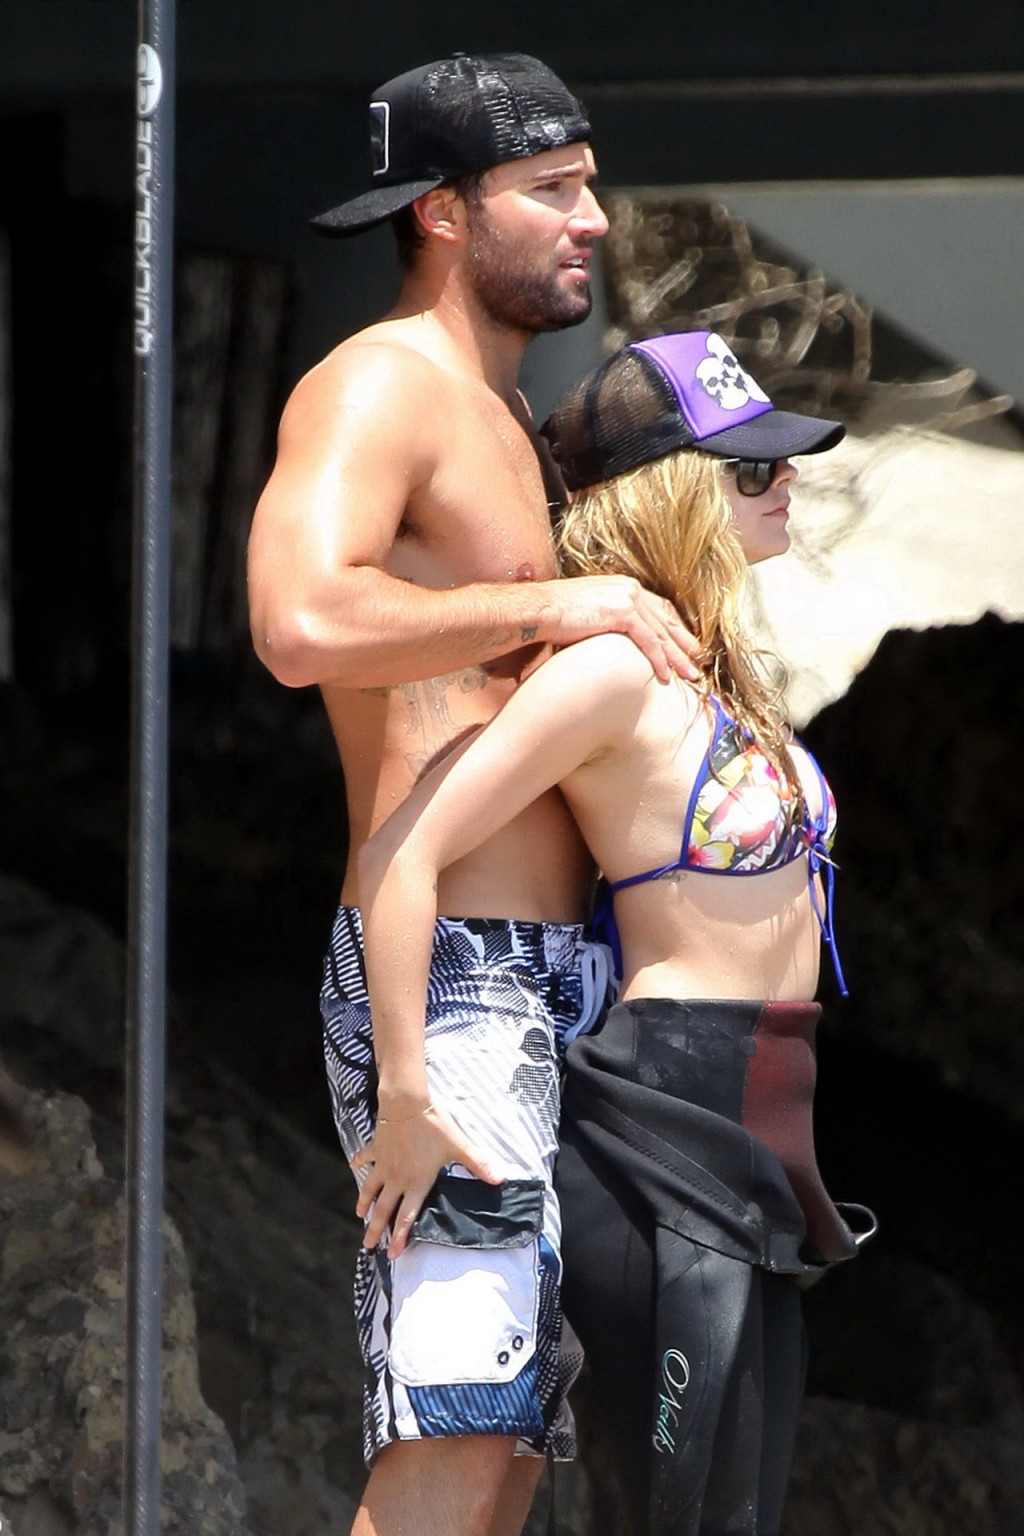 Avril Lavigne wearing a bikini top and a wetsuit on the beach in Malibu #75342789